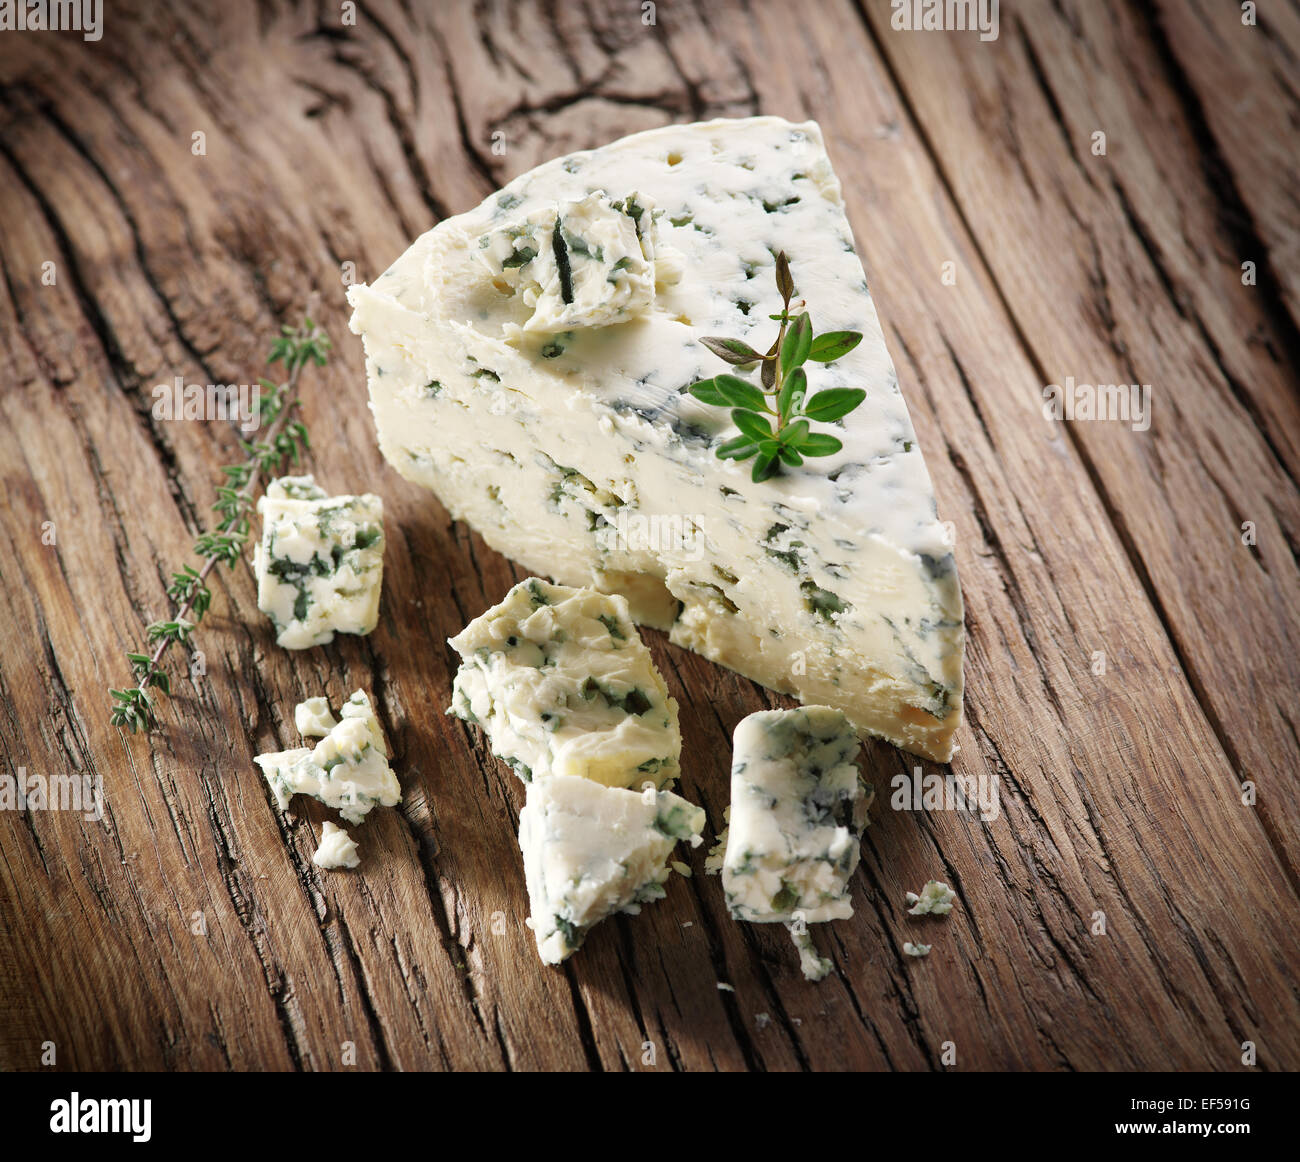 Slices of Danish Blue cheese on an old wooden table. Stock Photo